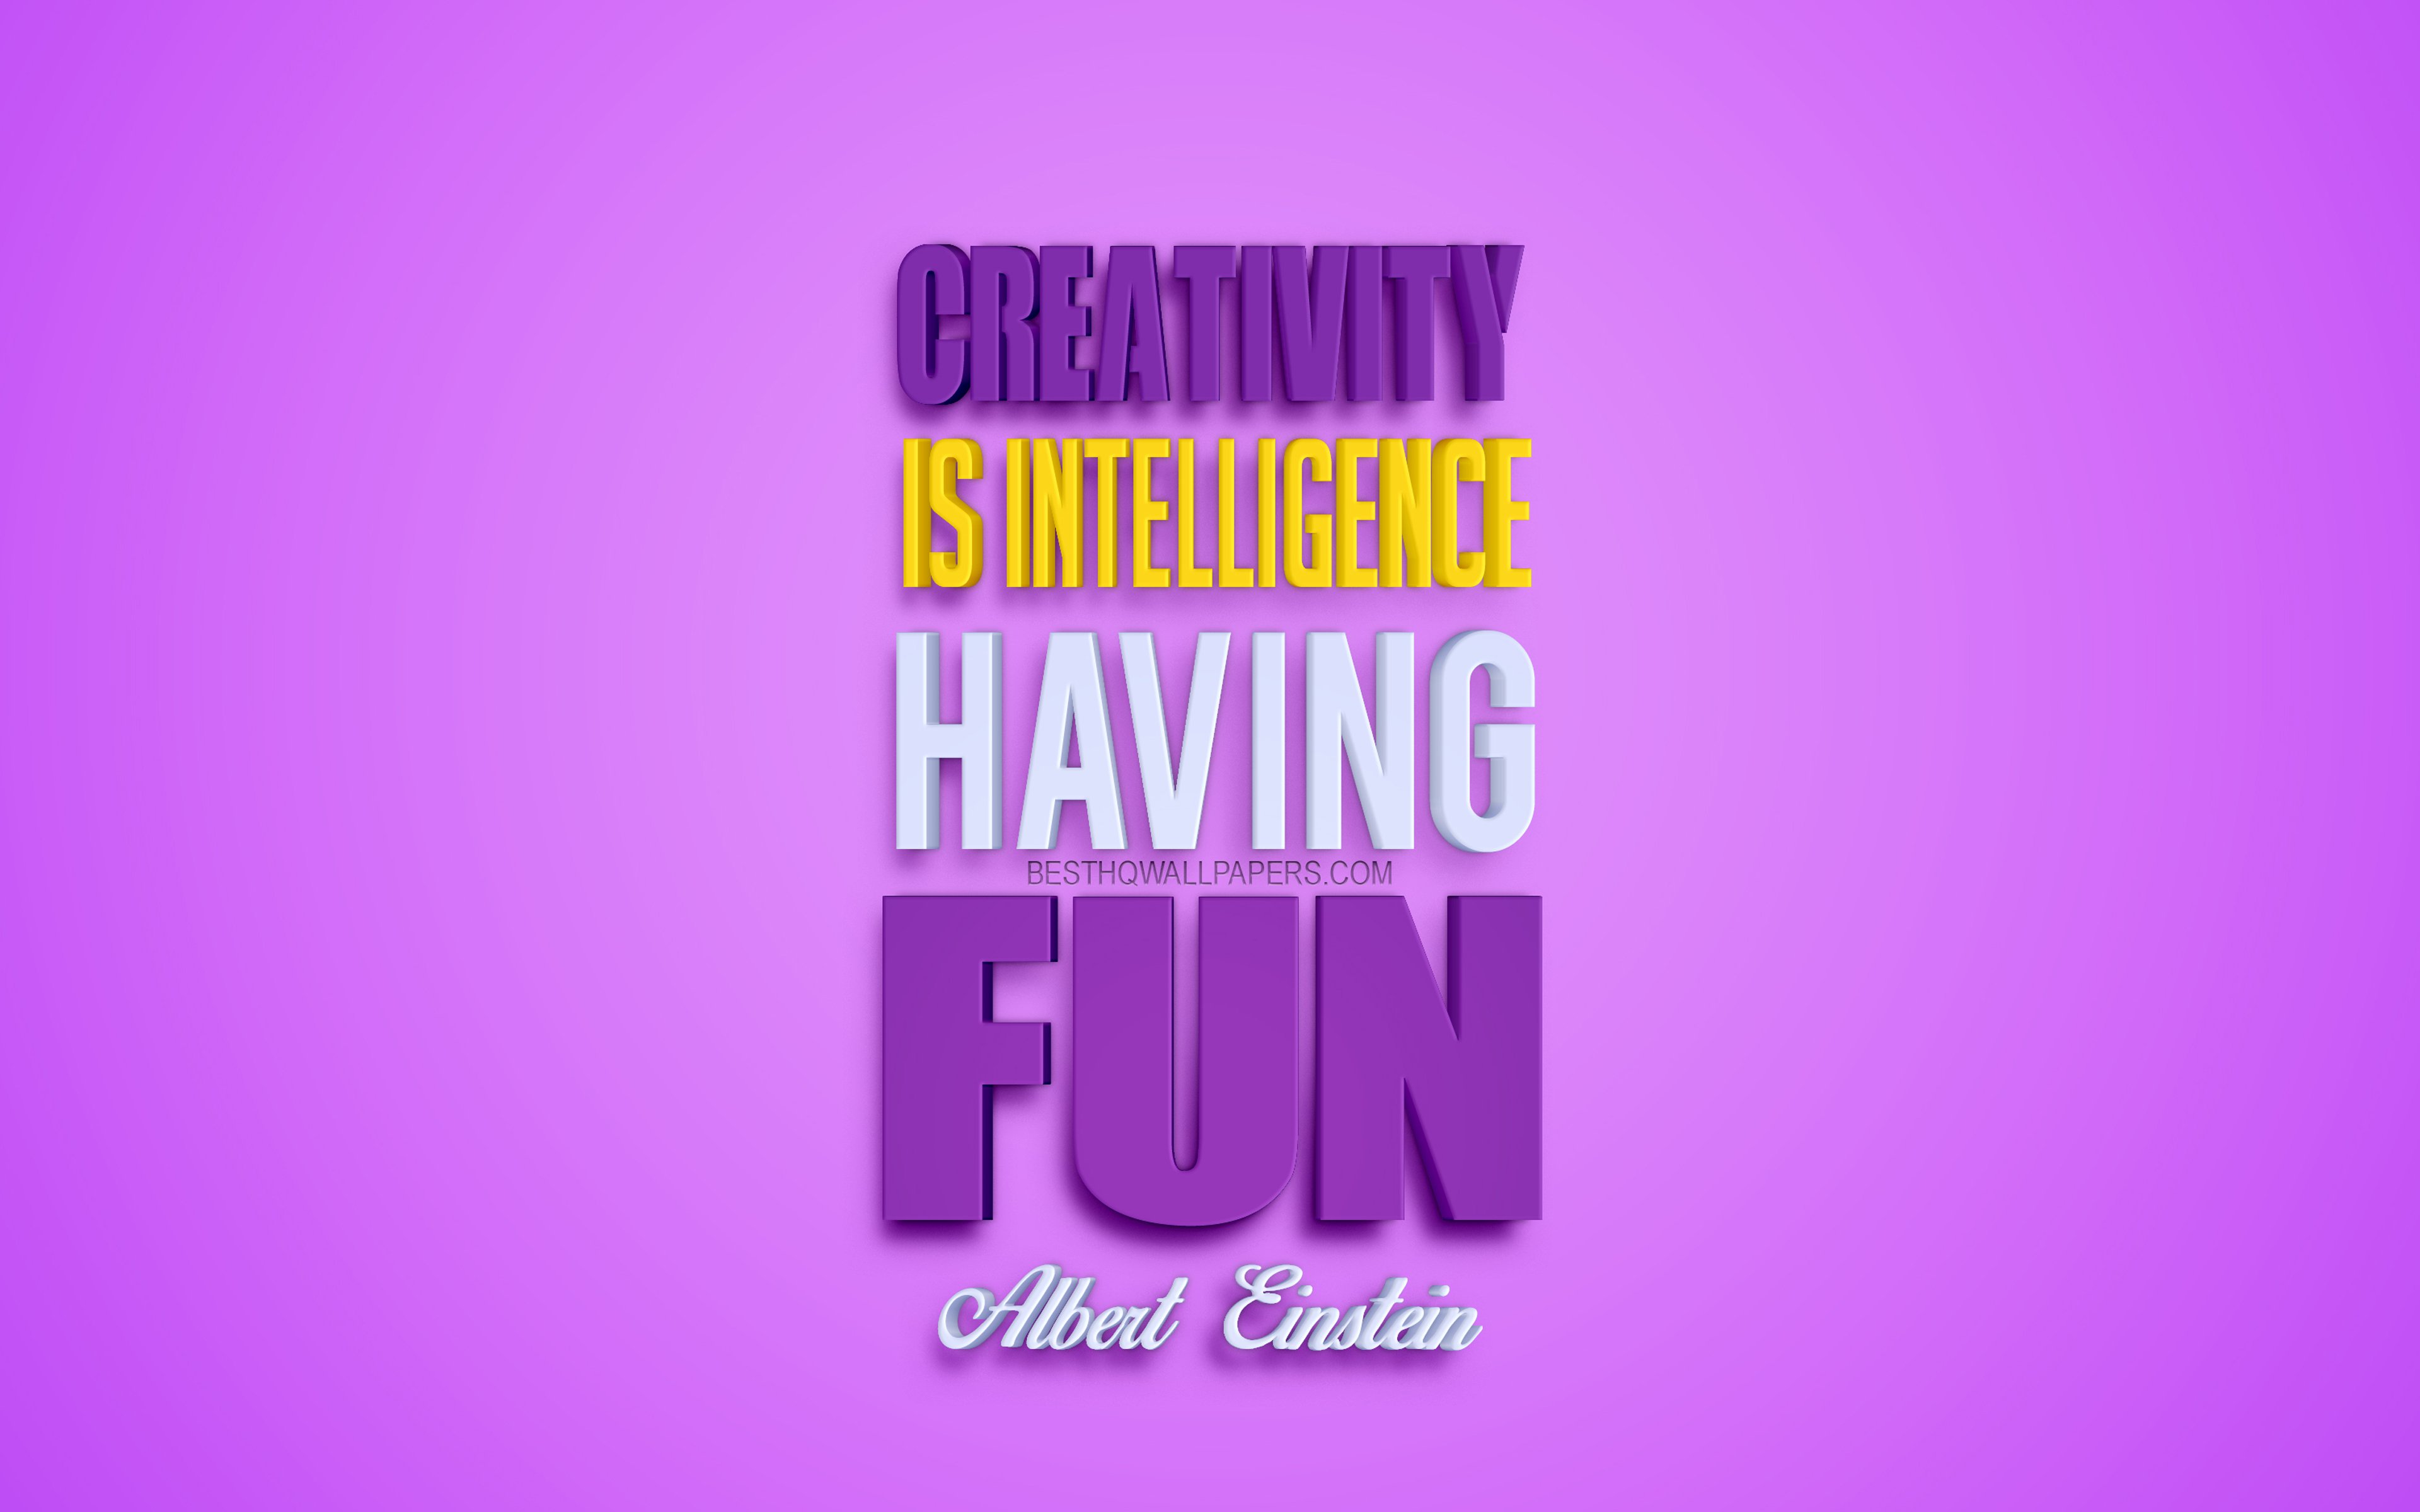 Download wallpapers Creativity is intelligence having fun, Albert Einstein  quotes, 3d art, popular quotes, motivation, purple background for desktop  with resolution 3840x2400. High Quality HD pictures wallpapers